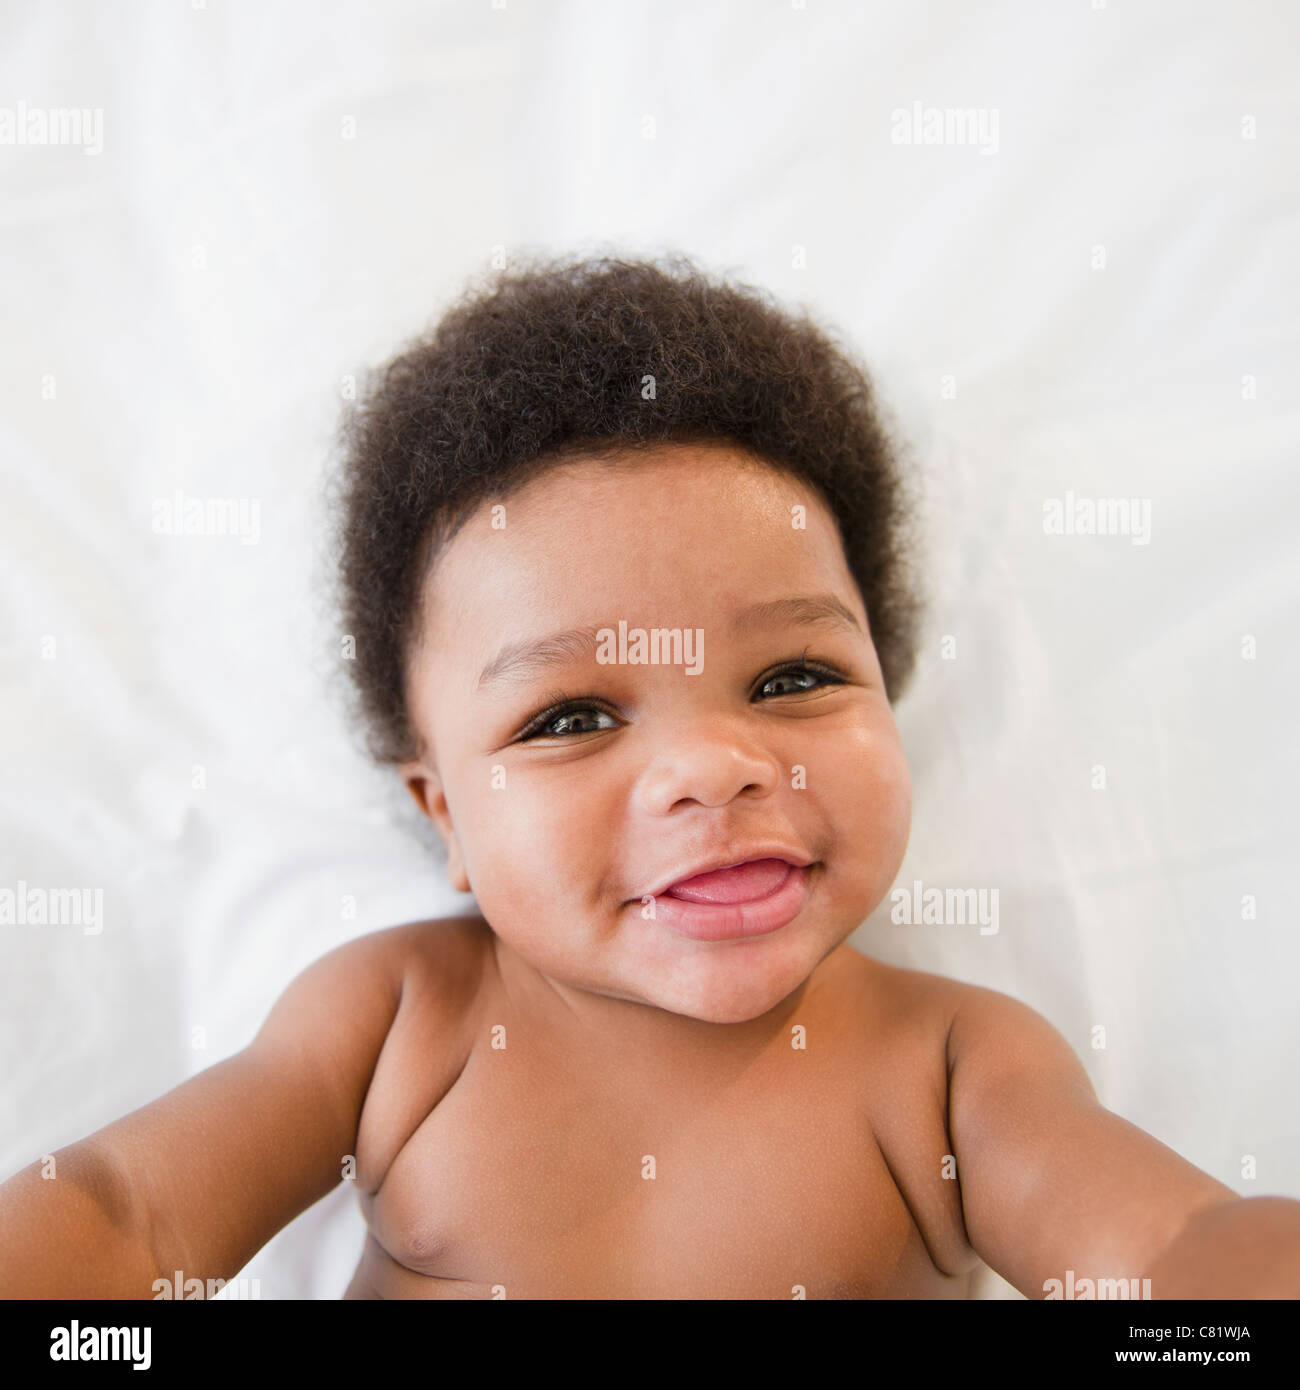 Smiling African American baby boy Stock Photo